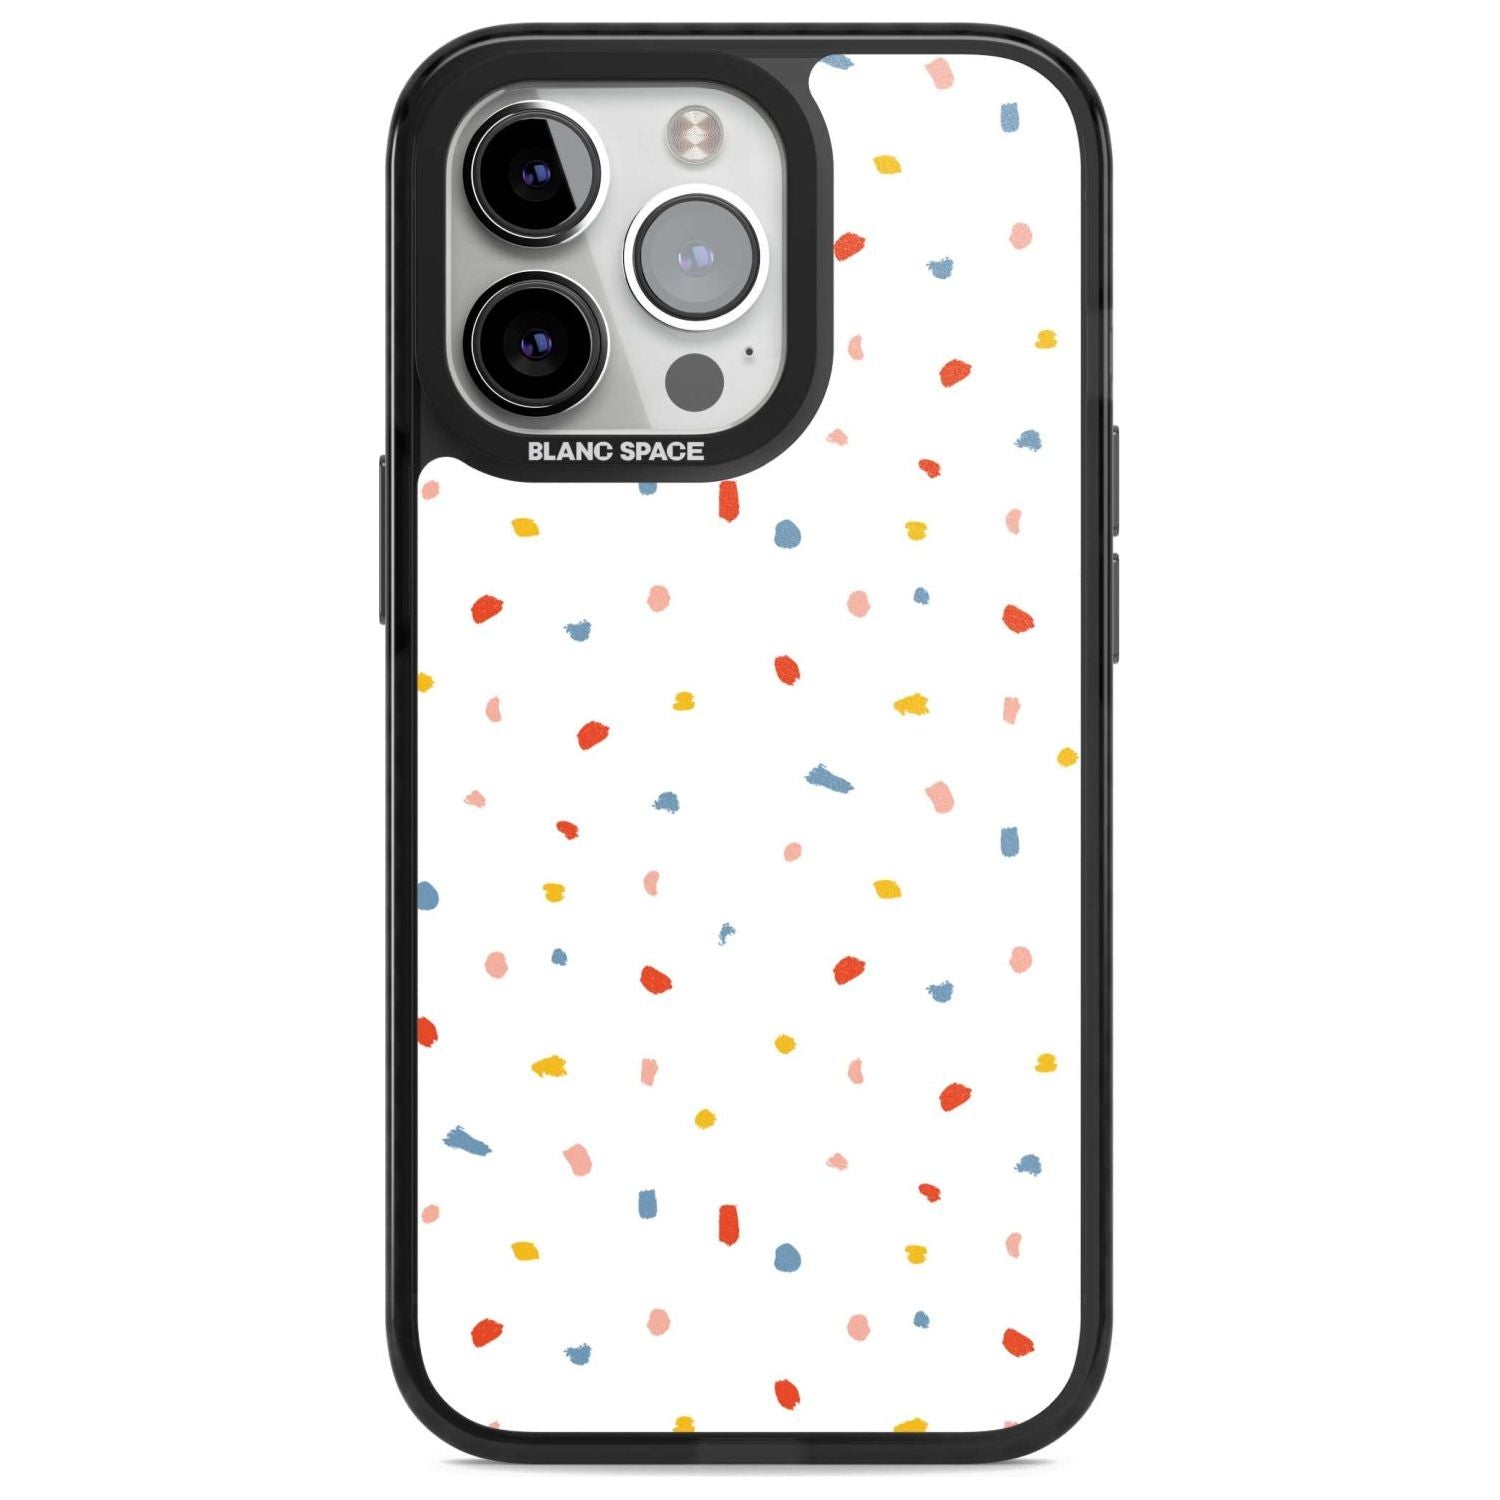 Confetti Print on Solid White Phone Case iPhone 15 Pro Max / Magsafe Black Impact Case,iPhone 15 Pro / Magsafe Black Impact Case,iPhone 14 Pro Max / Magsafe Black Impact Case,iPhone 14 Pro / Magsafe Black Impact Case,iPhone 13 Pro / Magsafe Black Impact Case Blanc Space